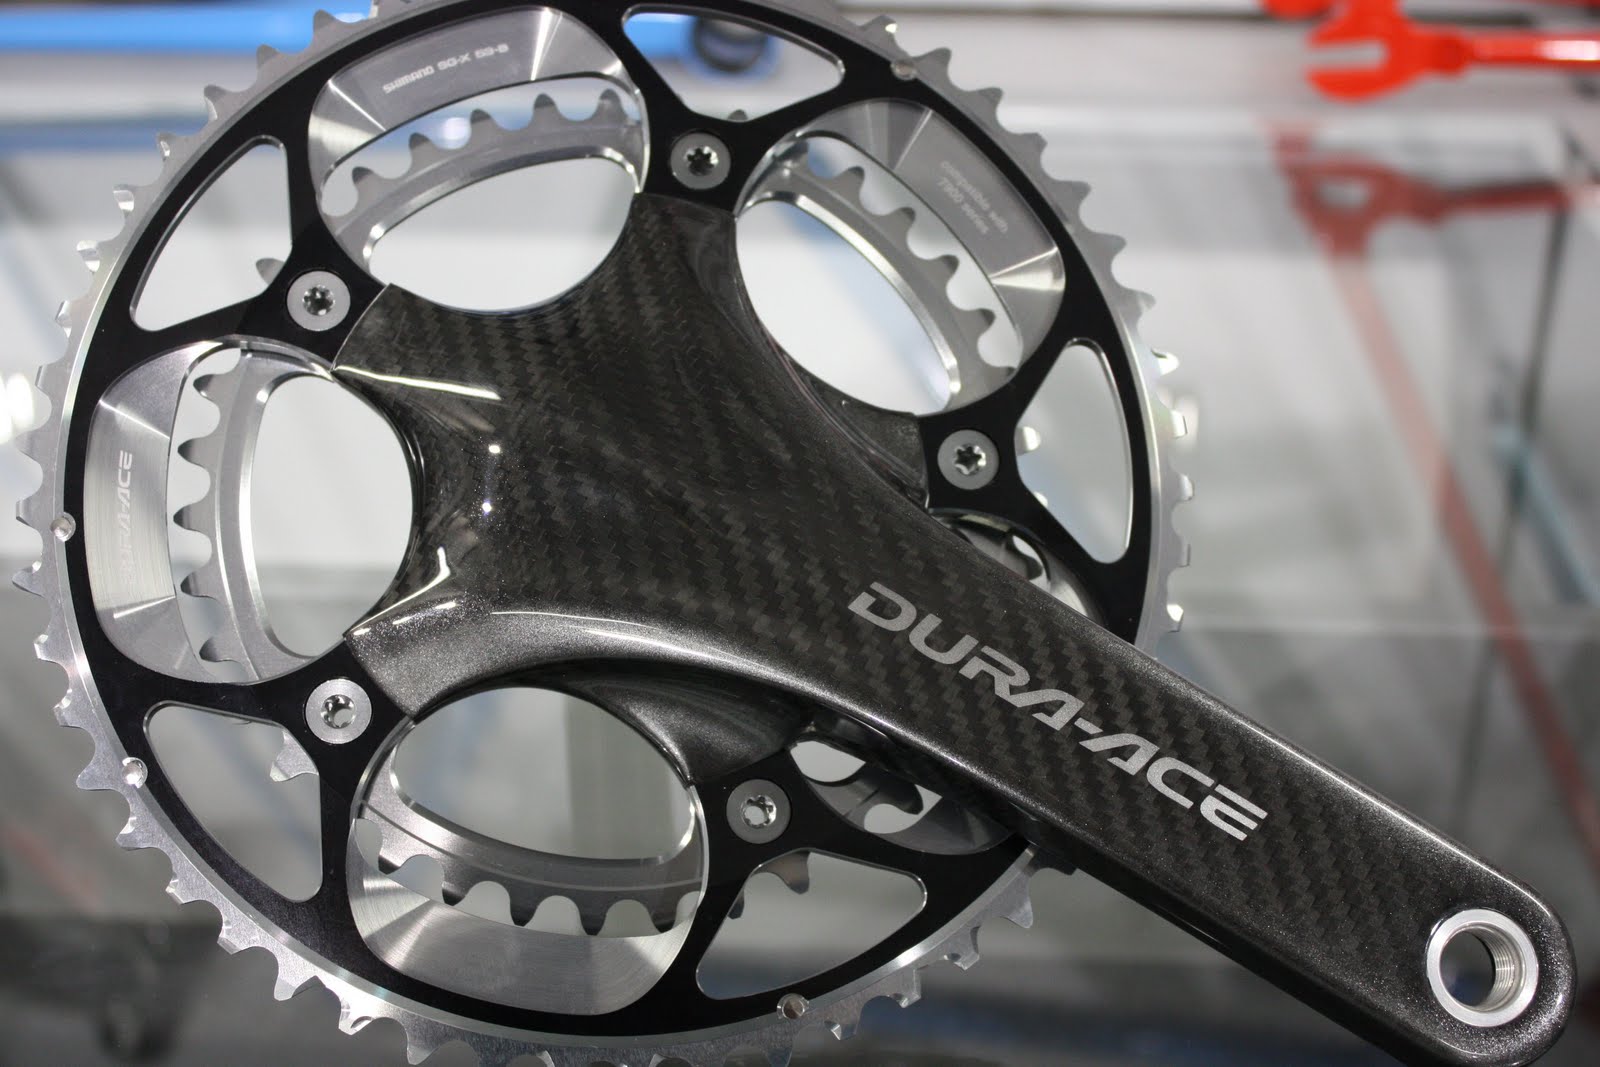 Dura_Ace_carbon_chainset_at_Condor_Cycles.JPG